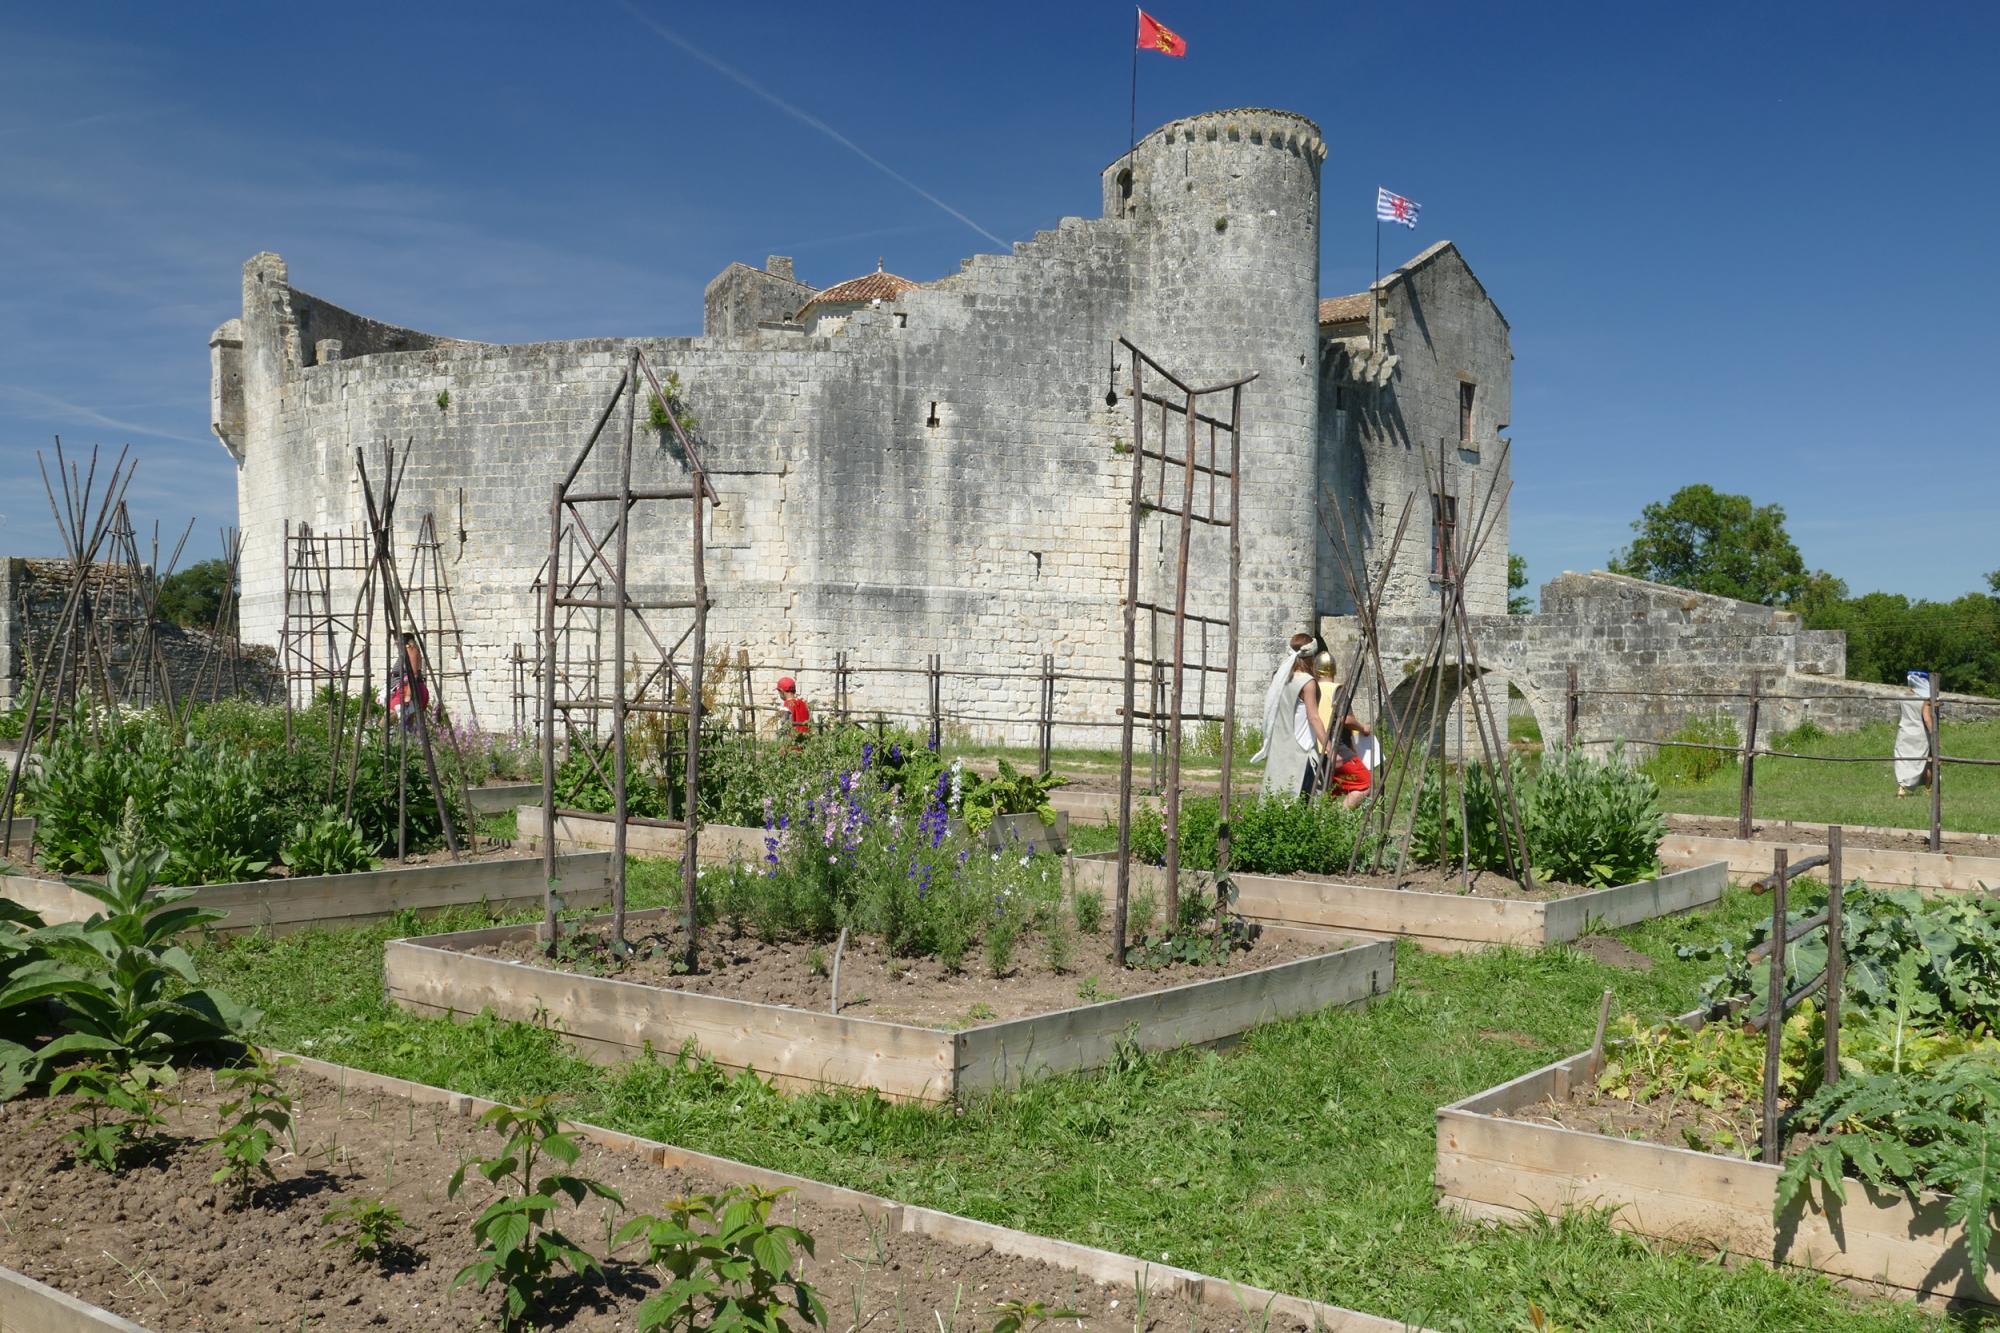 A medieval-style garden - Fortified castle and medieval theme park in Charente Maritime